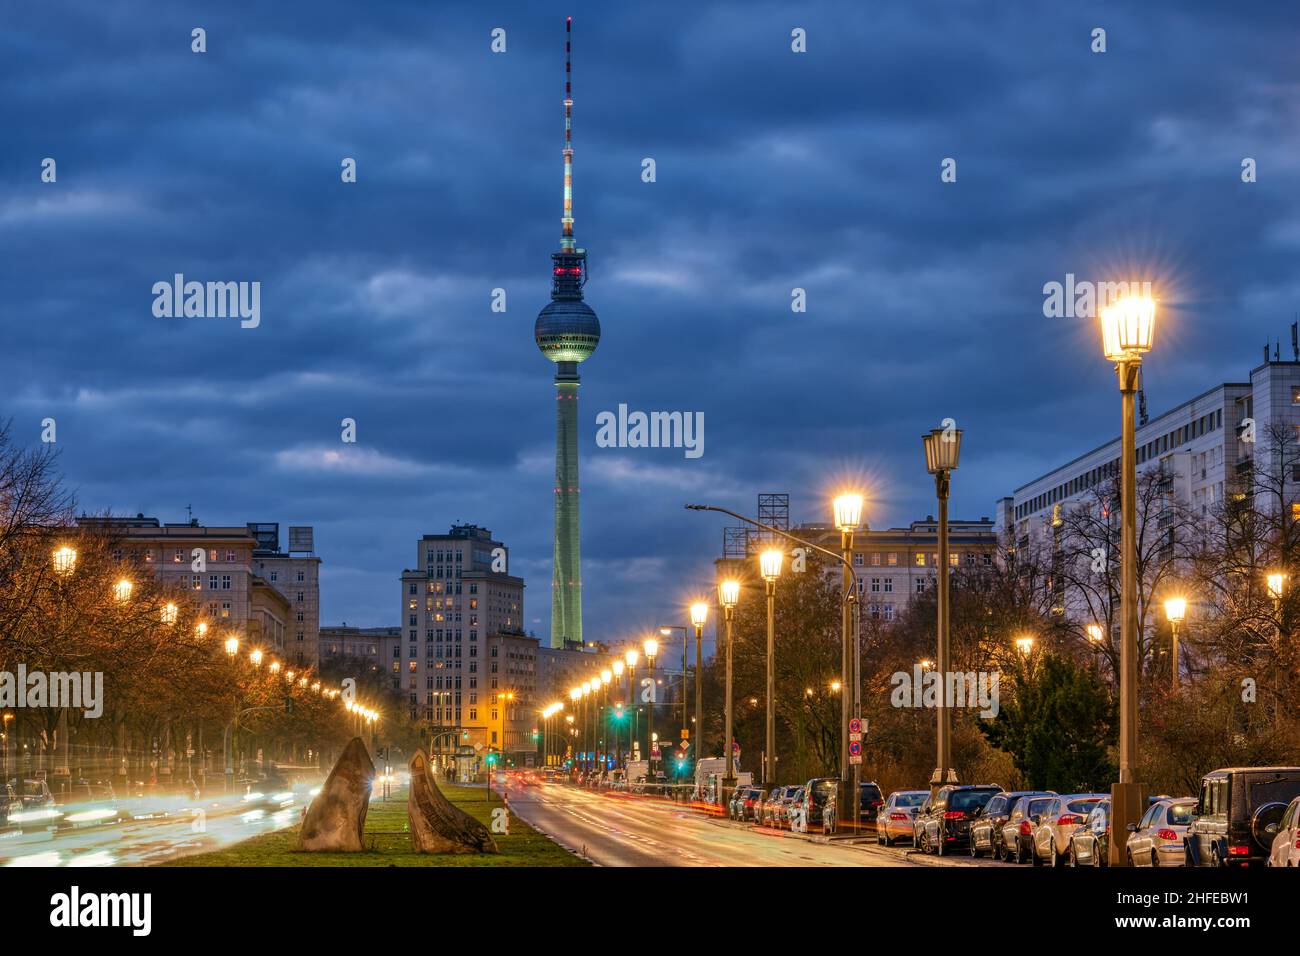 The famous TV Tower of Berlin with one of the big avenues at night Stock Photo